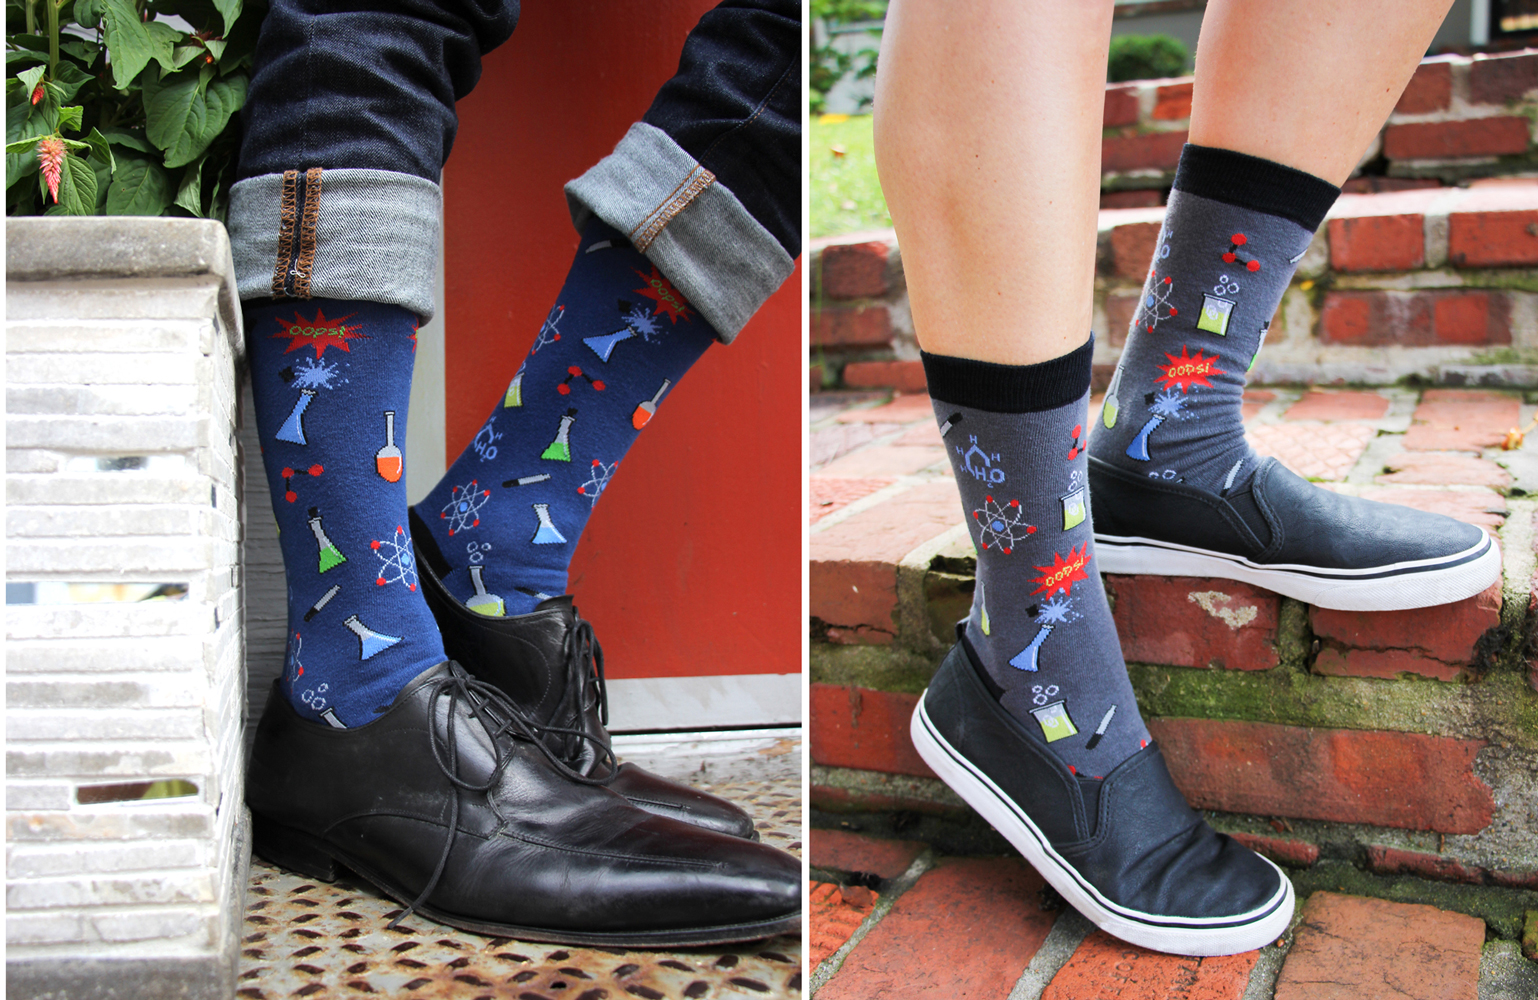 Photo of man and woman in front of red wearing blue and grey socks with a design of beakers and molecules on them.